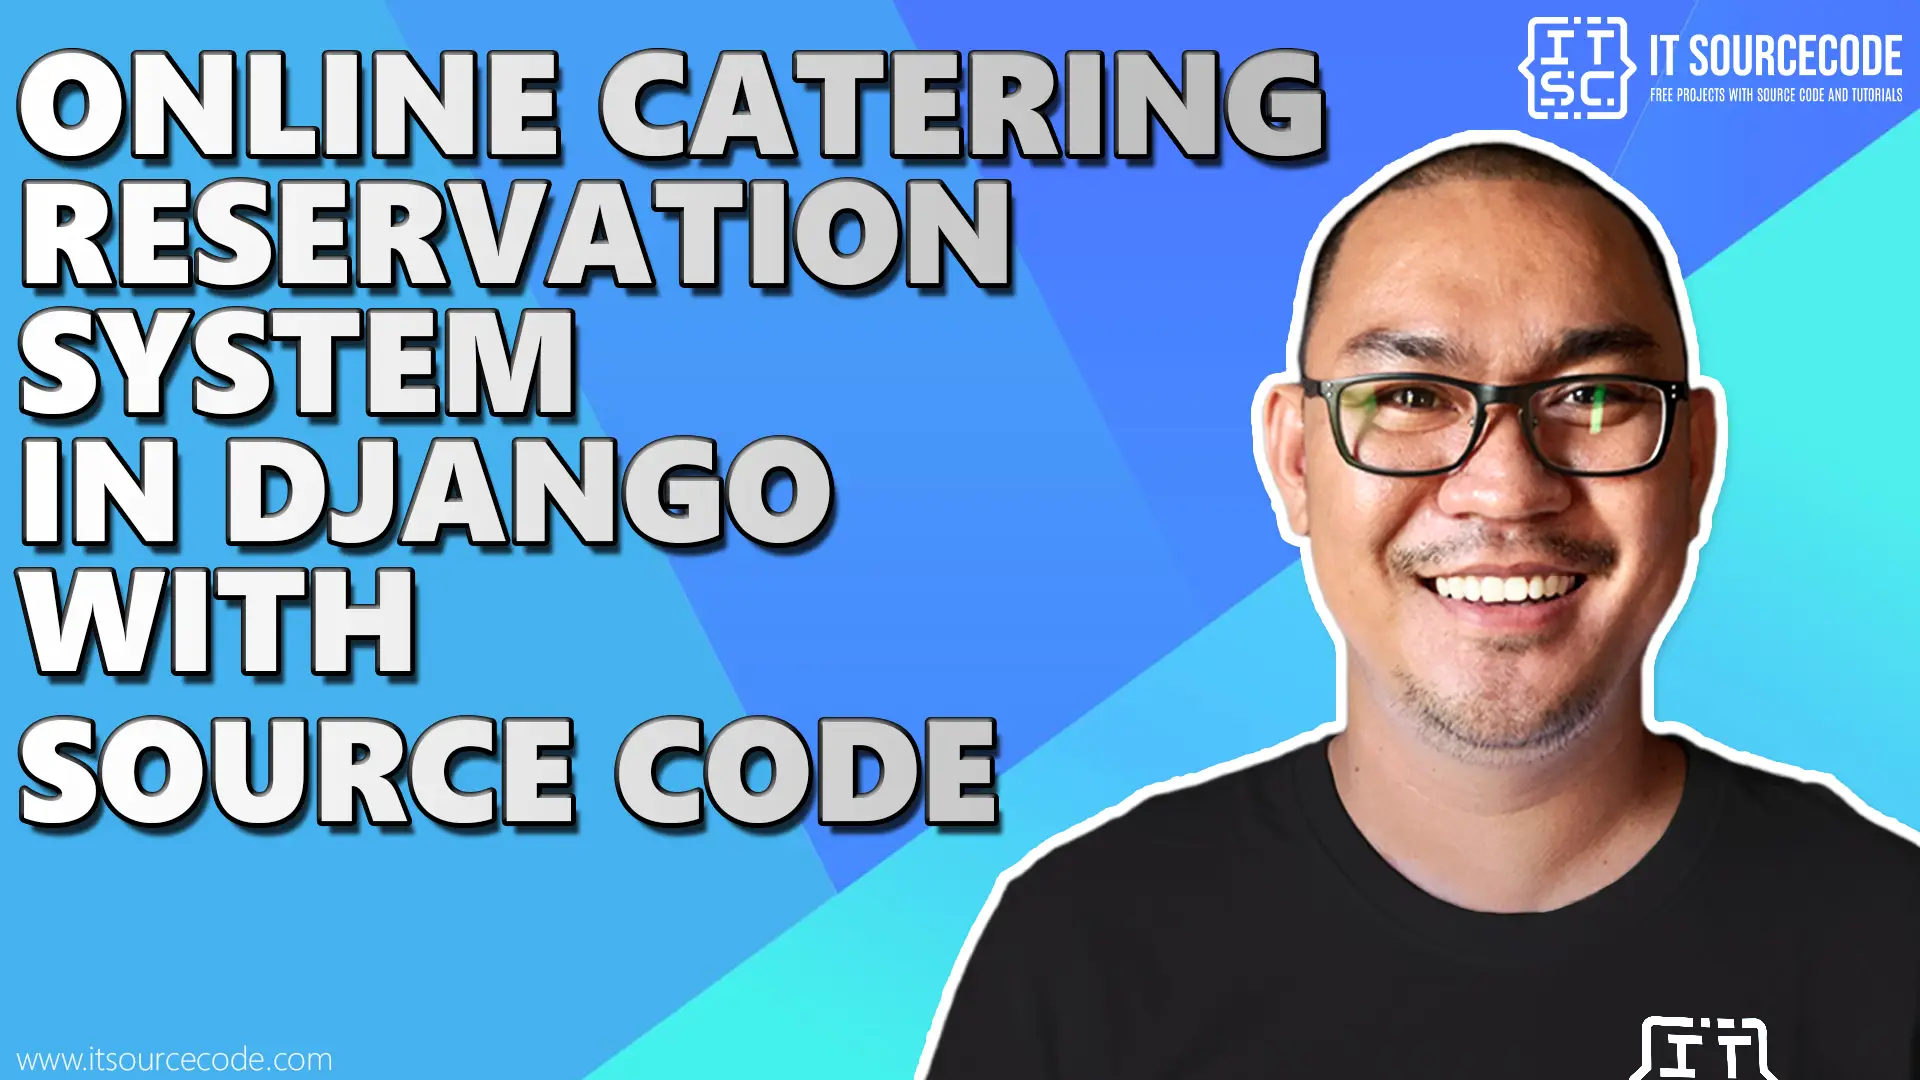 Online Catering Reservation System in Django with Source Code